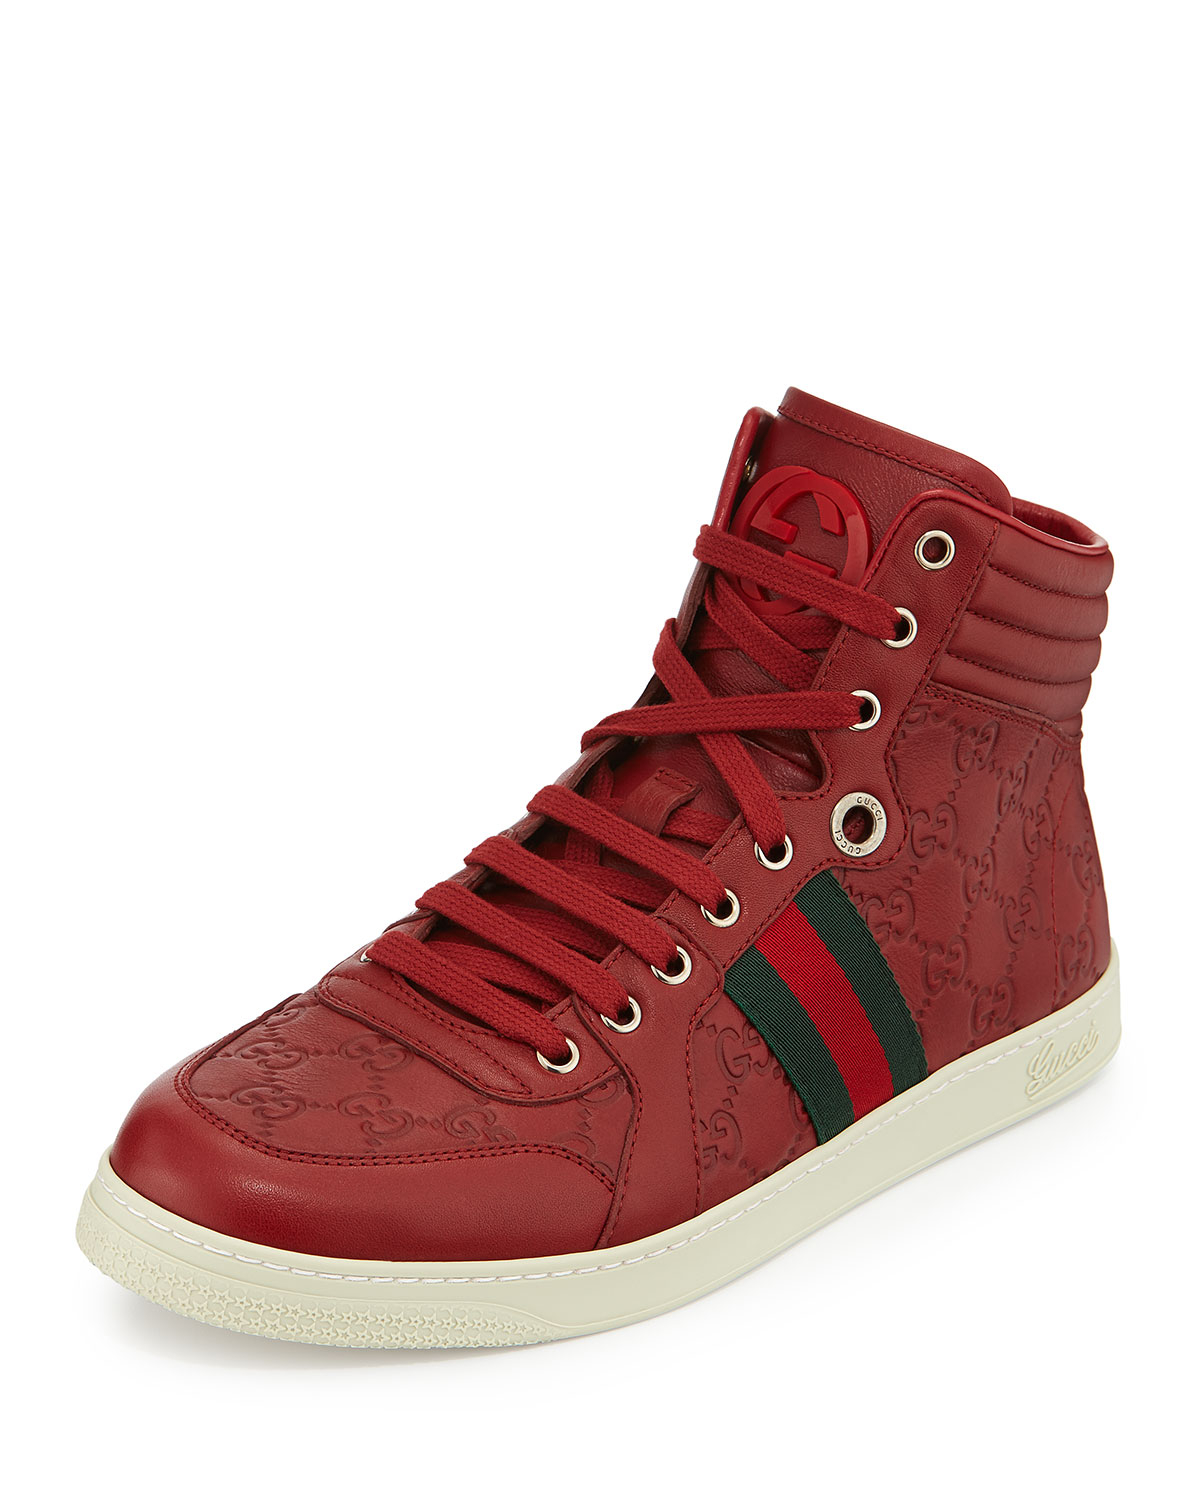 gucci red shoes for men, OFF 72%,Best 